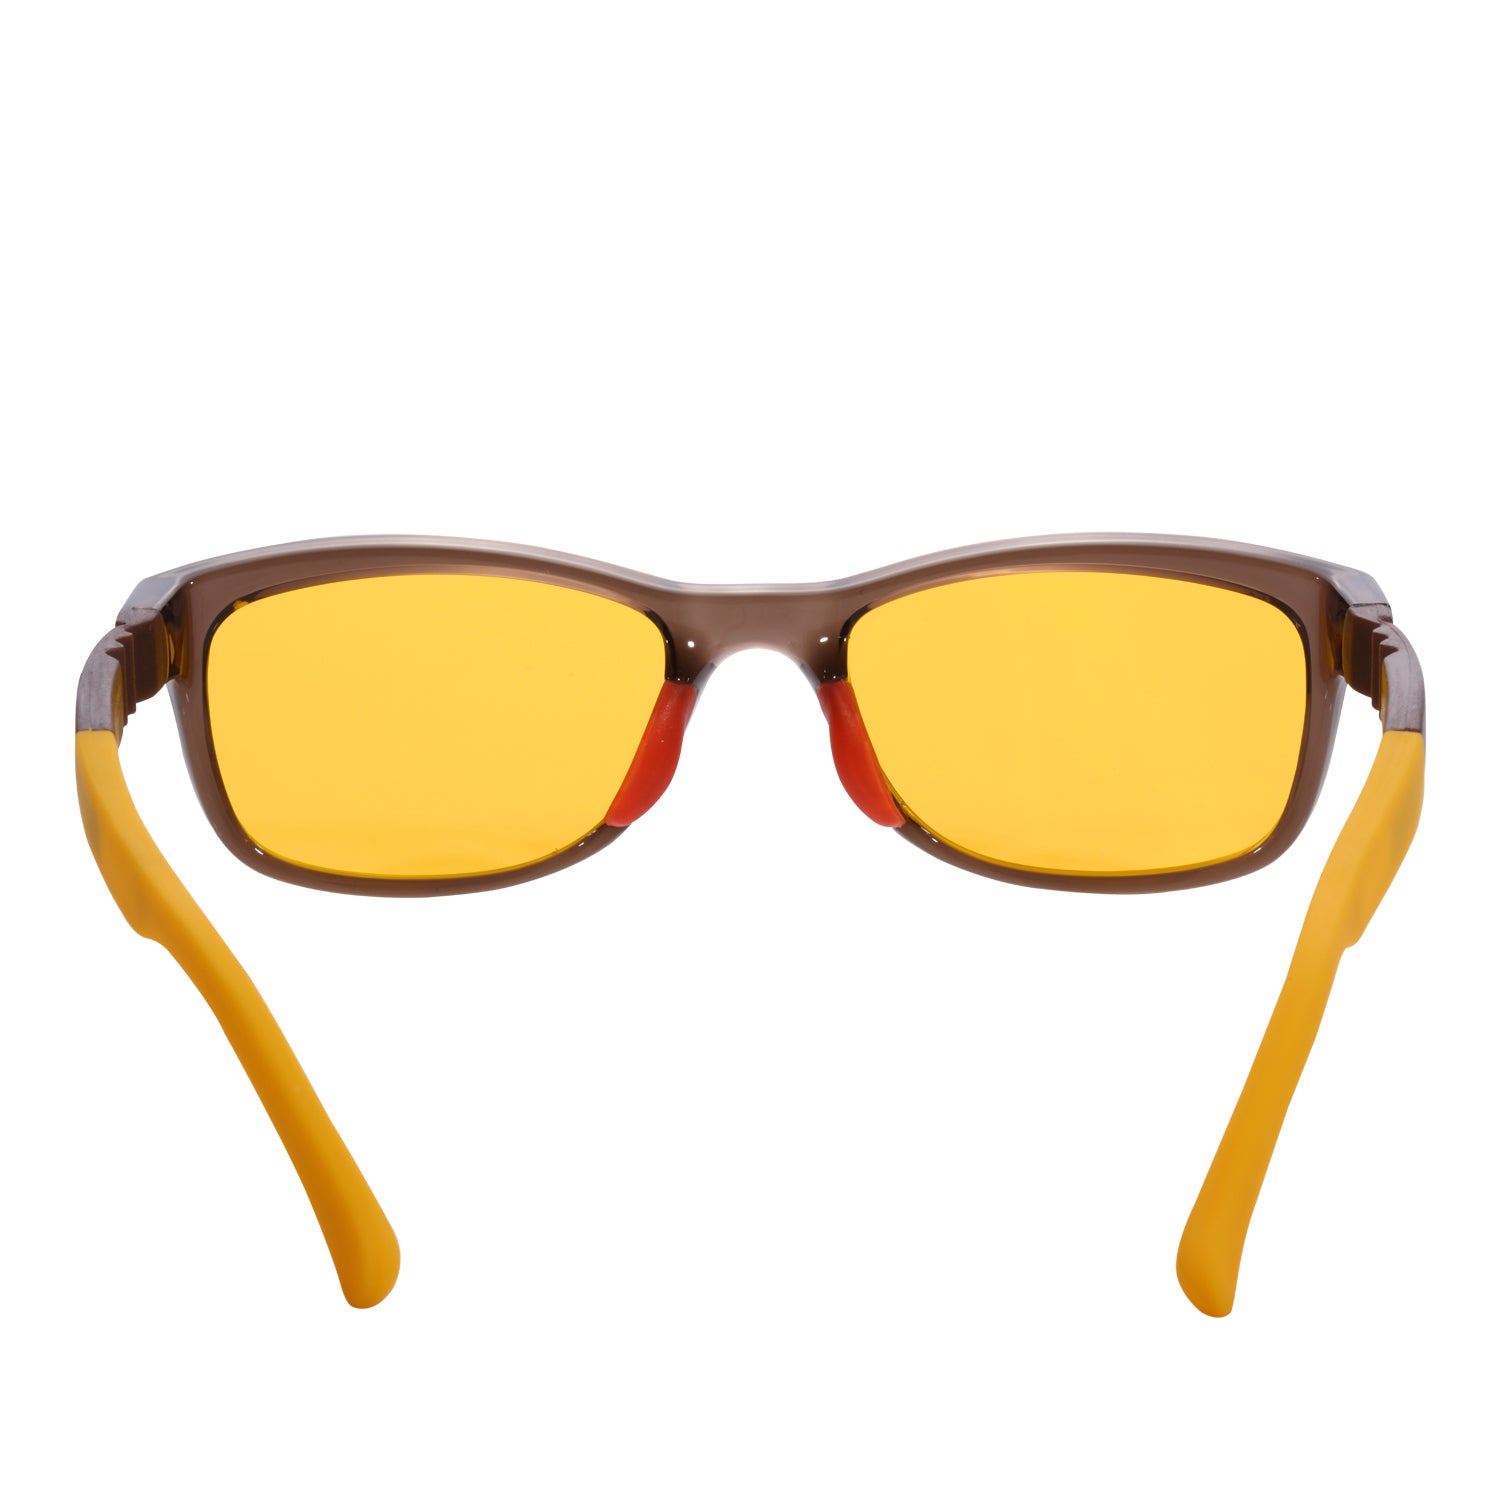 PRiSMA KiDS Blue Light Blocking Glasses for Children & Small Adults - Strong and flexible nylon frame  - brown & yellow